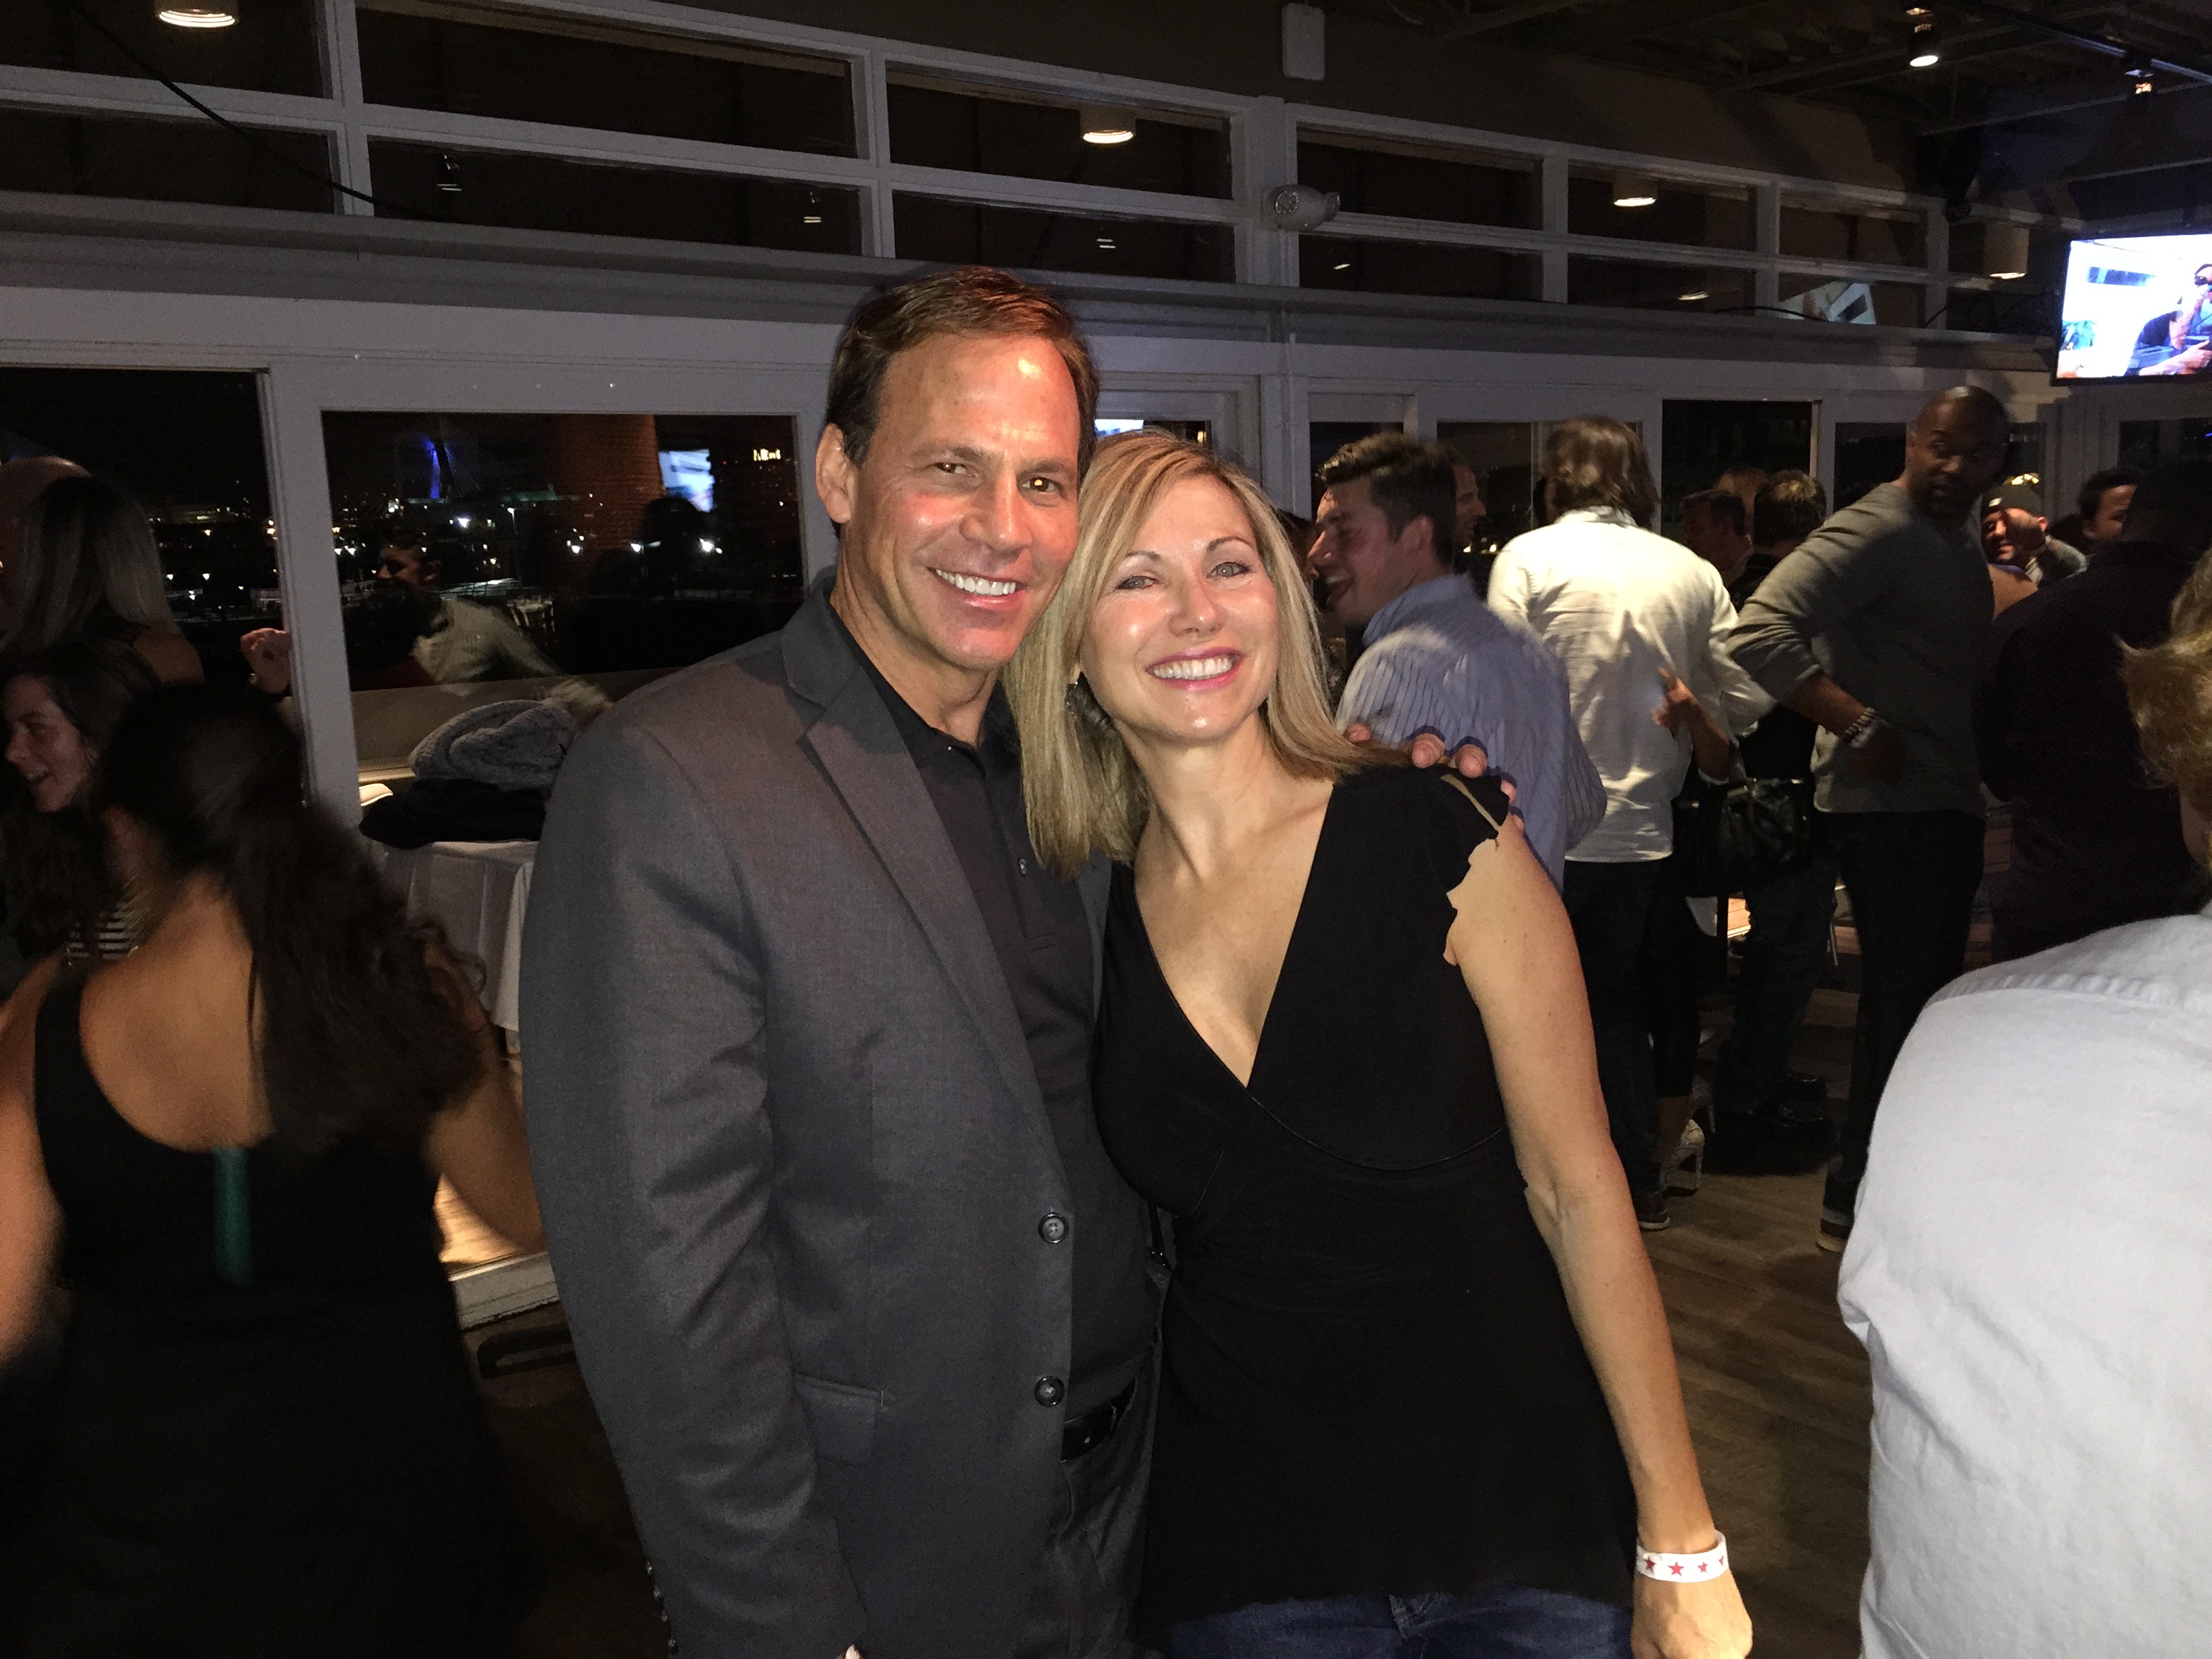 Central Intelligence wrap party with Susan Garibotto, Pier 6 Charestown, Mass. Summer 2015